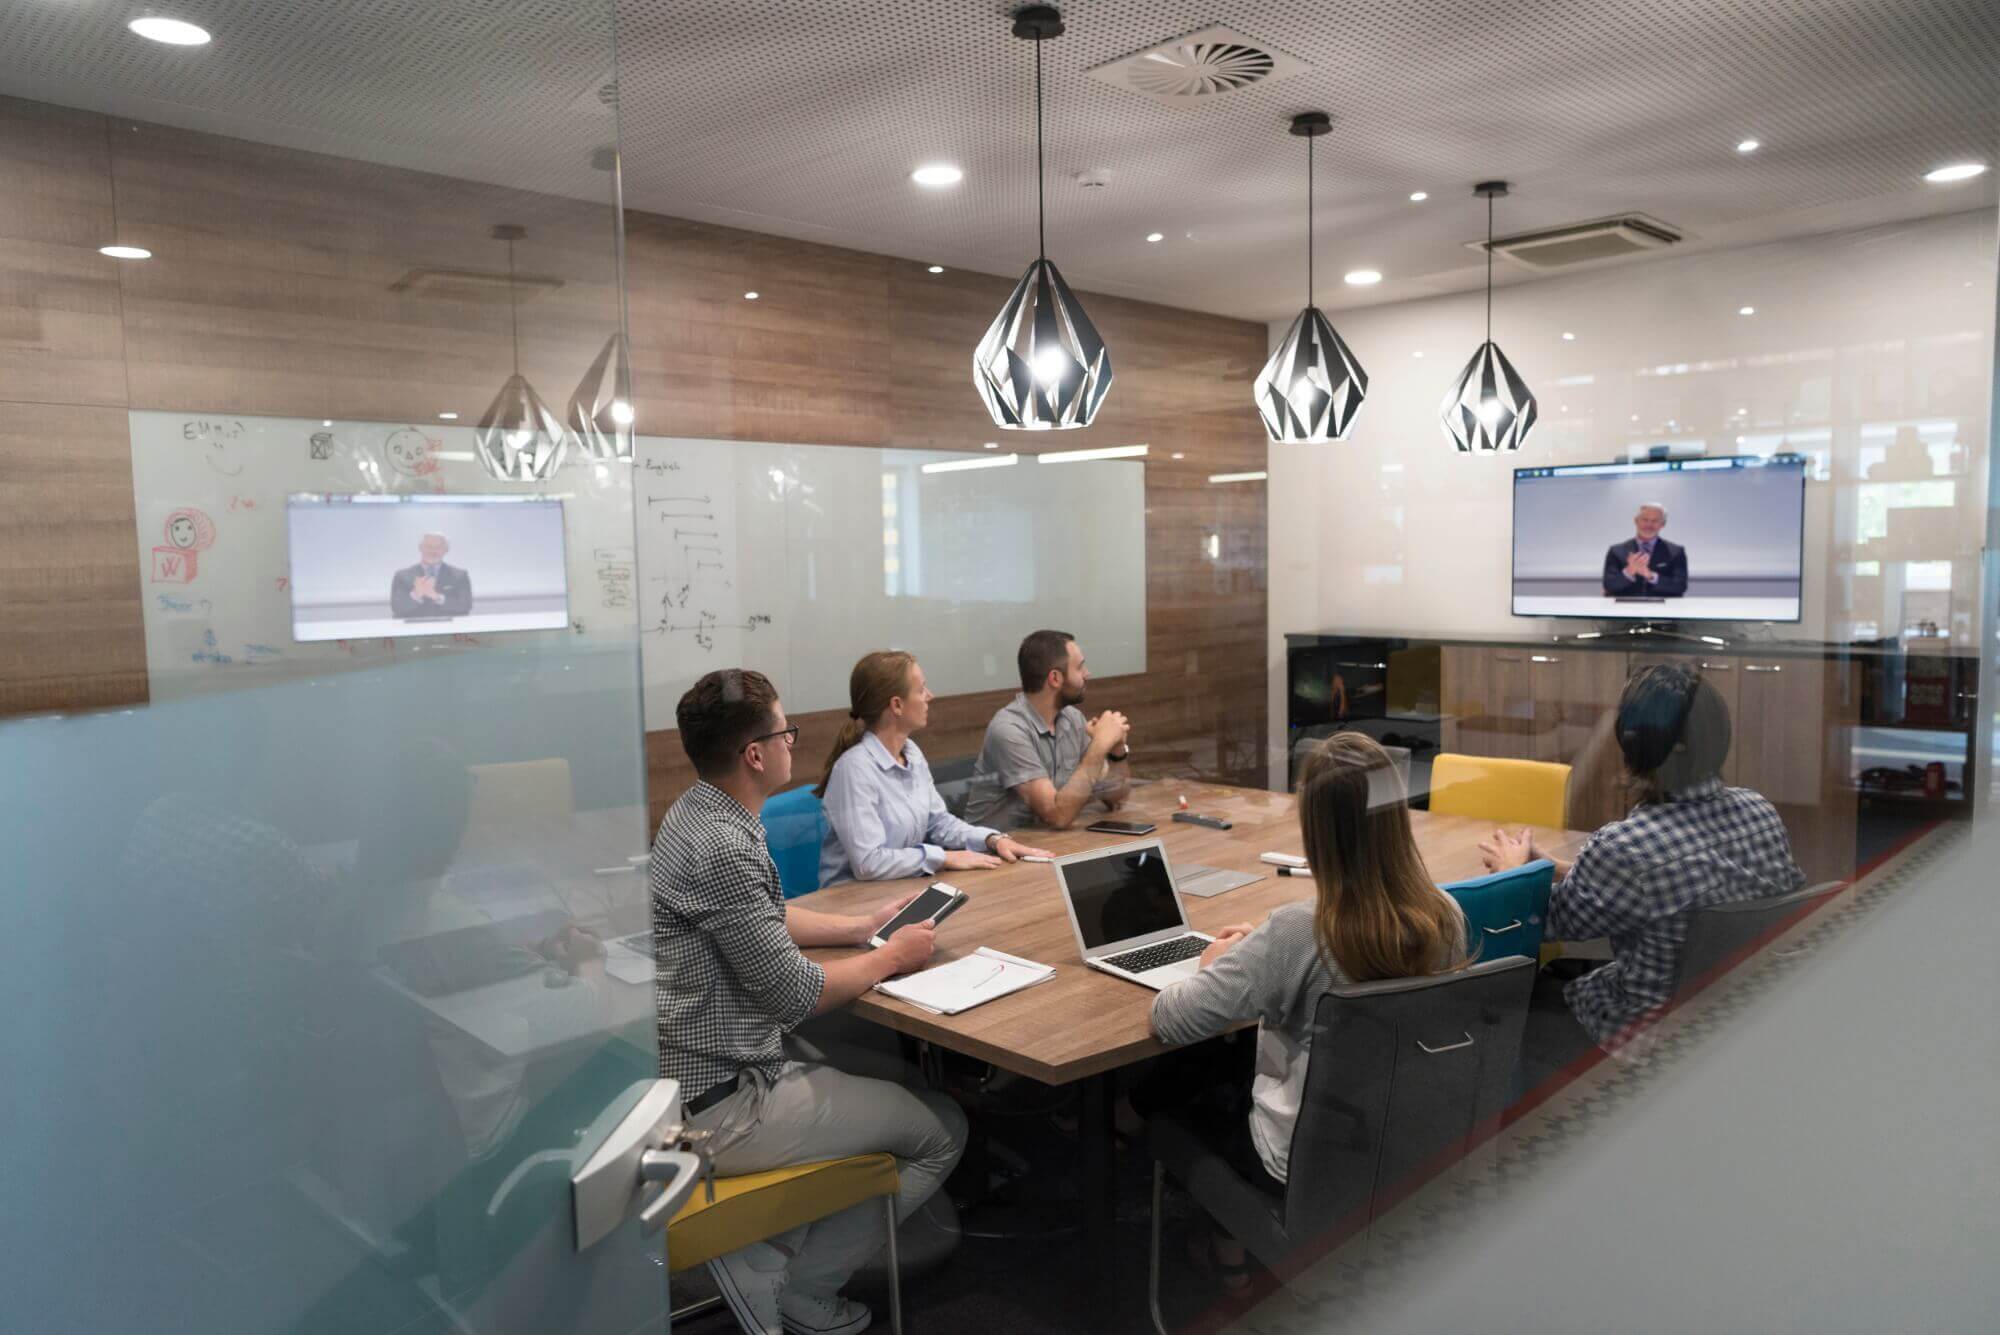 Group of workers sitting at conference table video conferencing with an older businessman